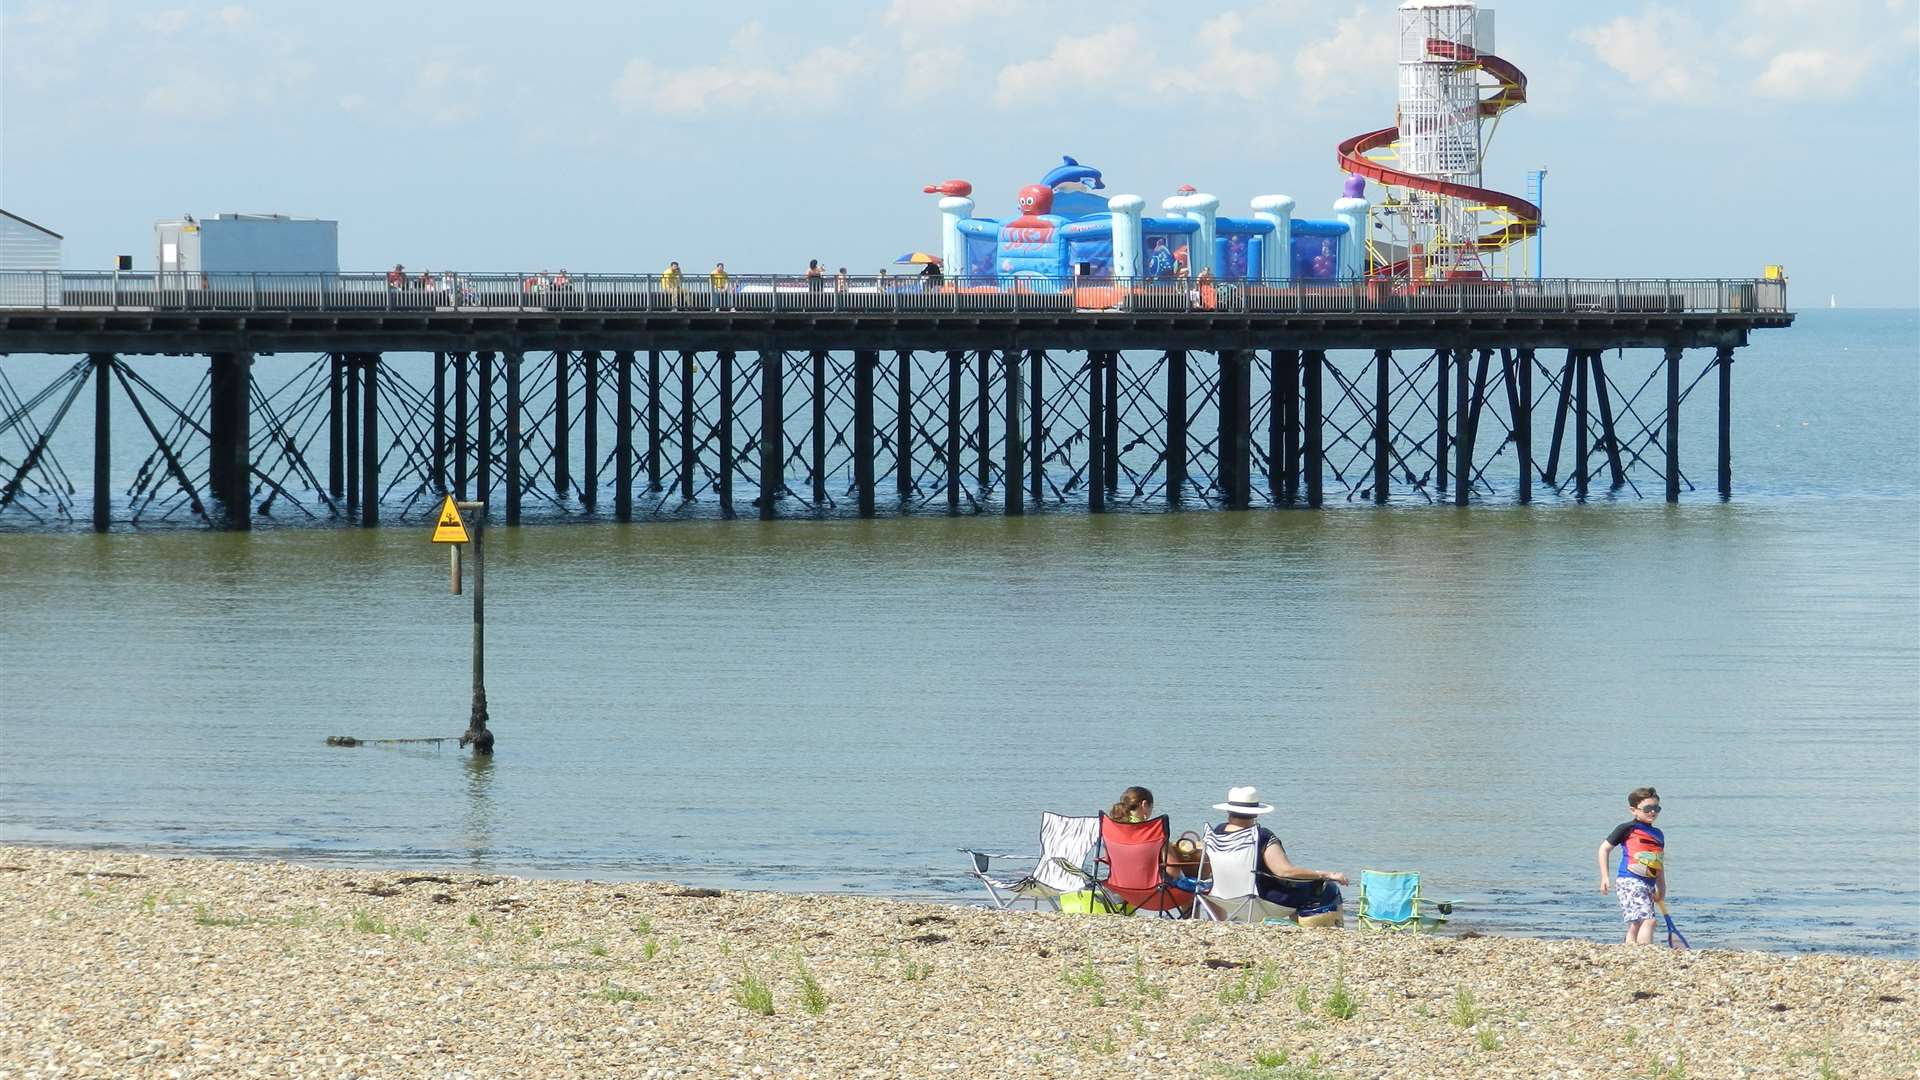 From the Pier to the beach, Jodi says Herne Bay has lots to offer